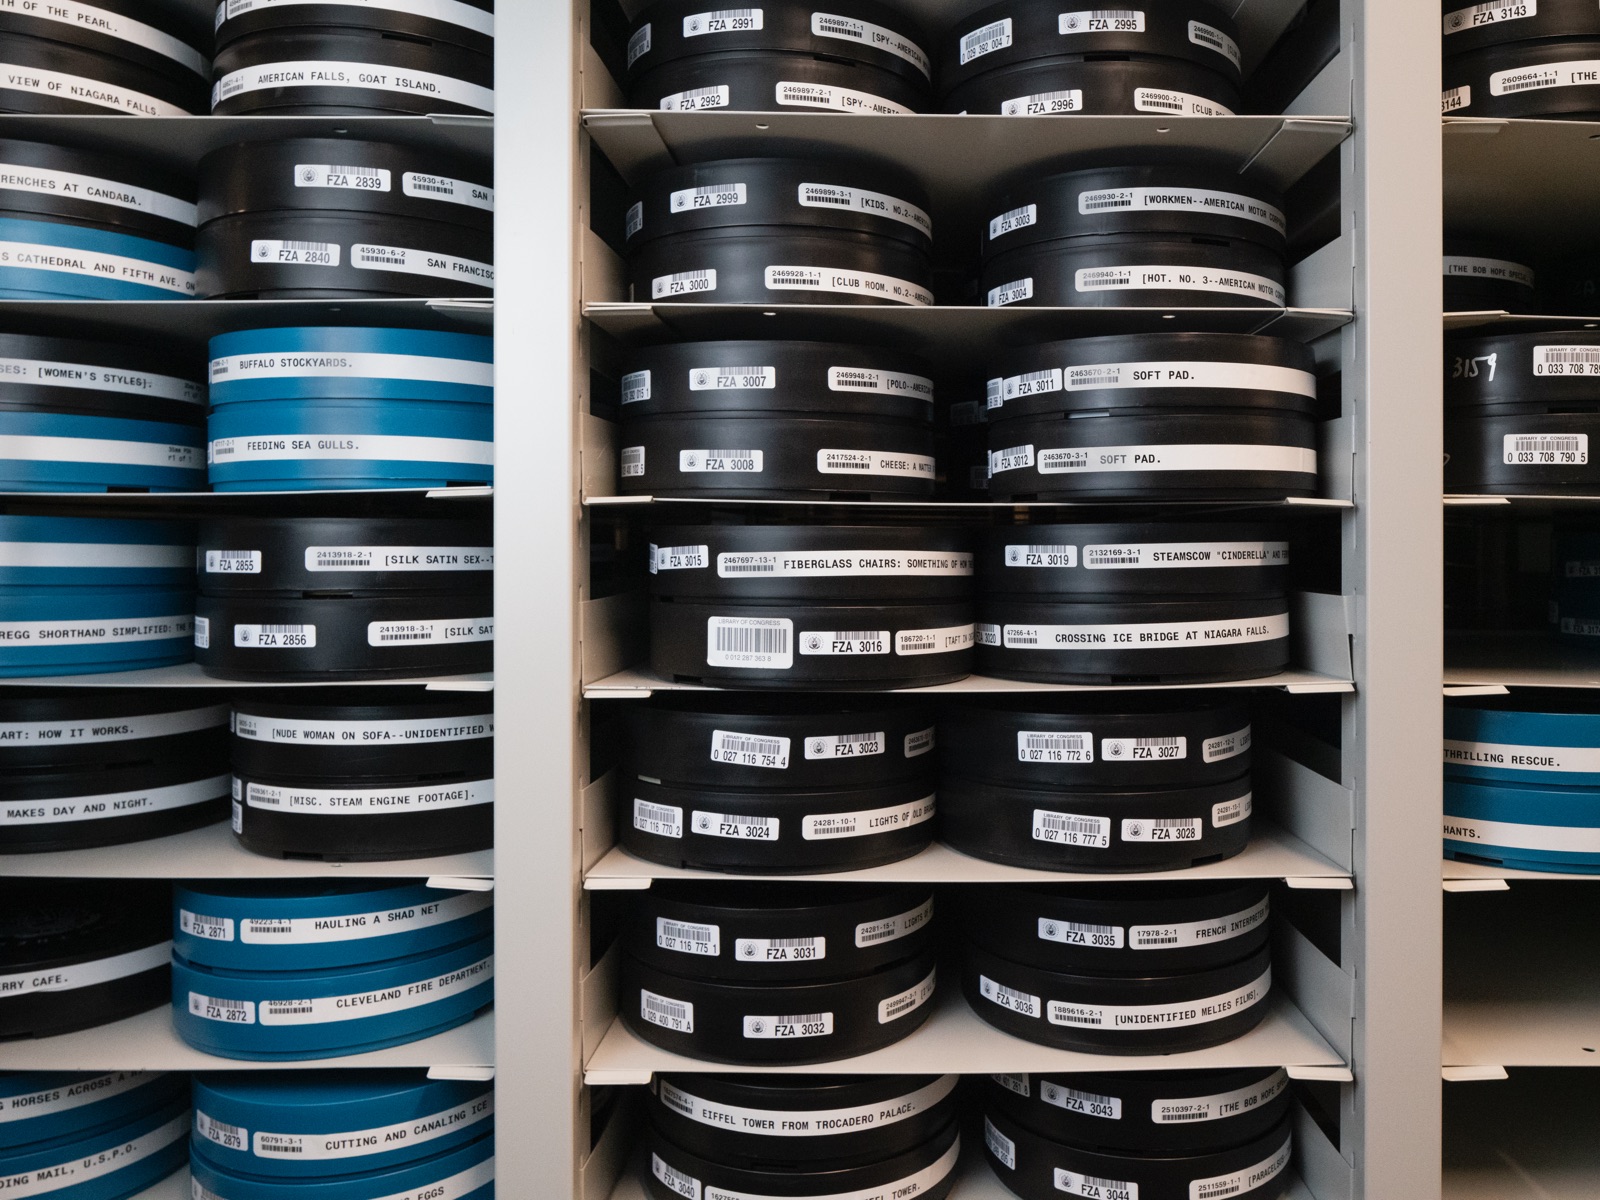 Restored films at the Library of Congress